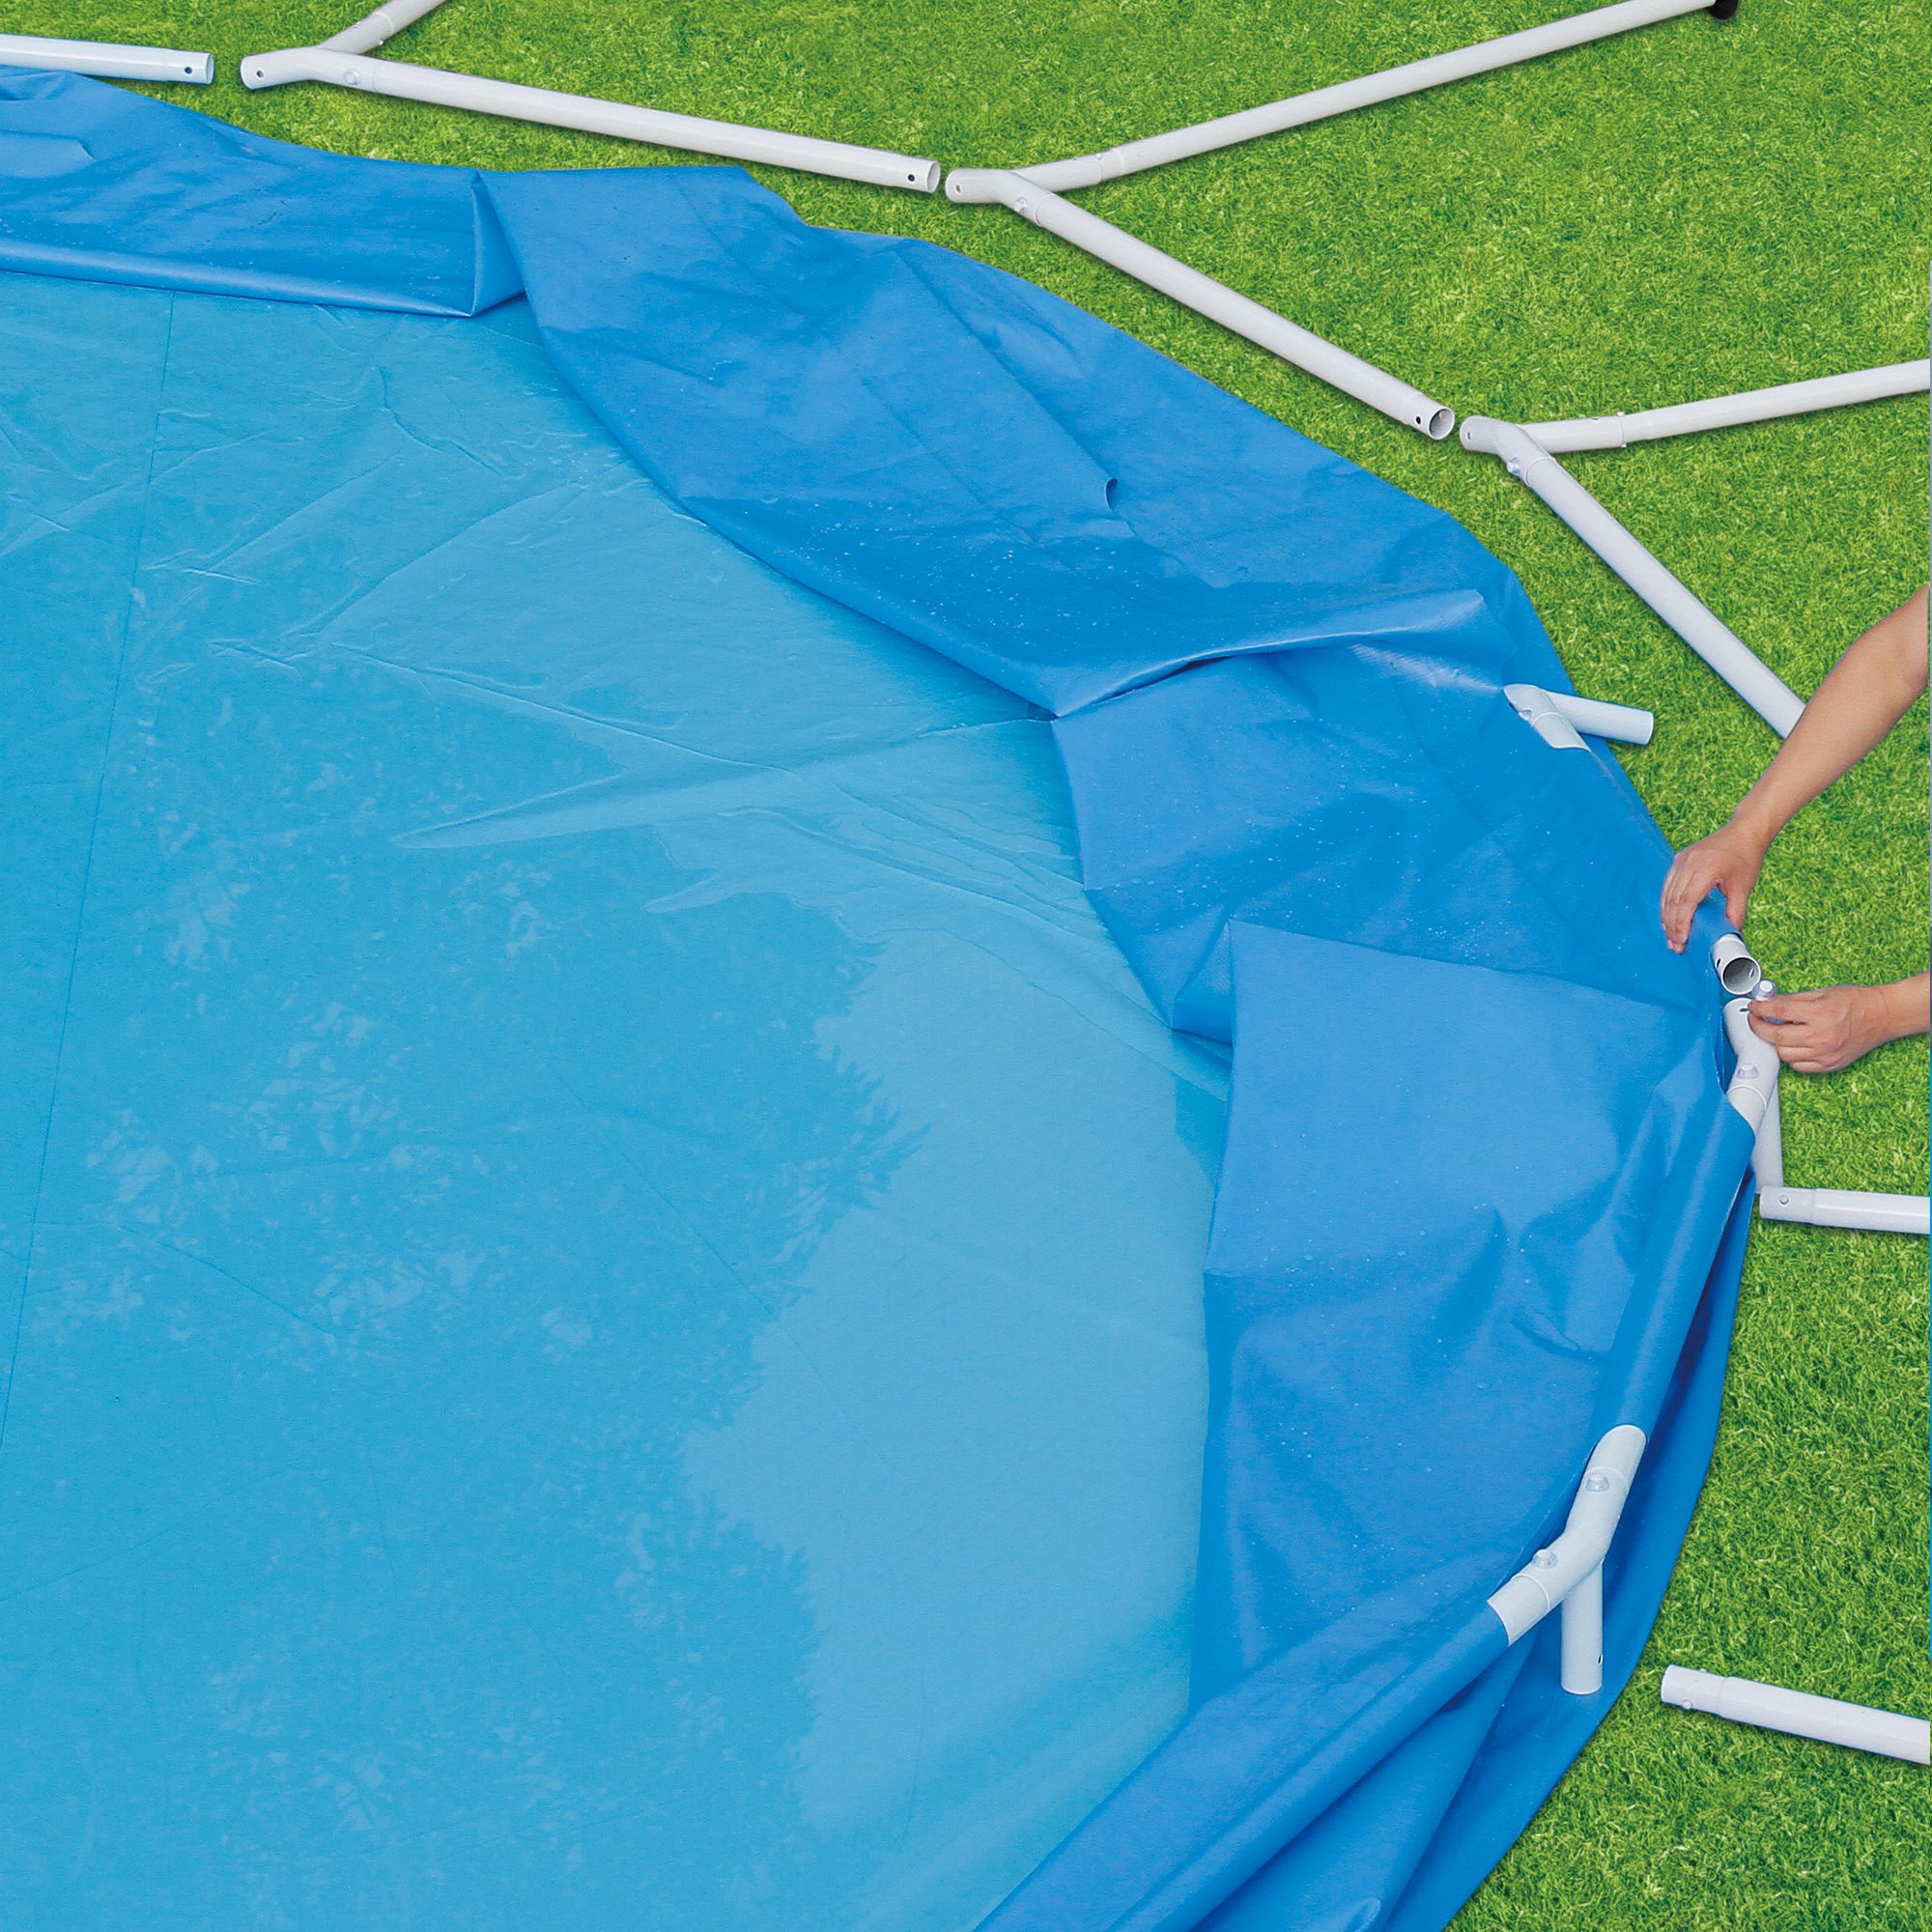 summer-waves-15-ft-active-frame-pool-with-filter-pump-cover-and-ladder-8.